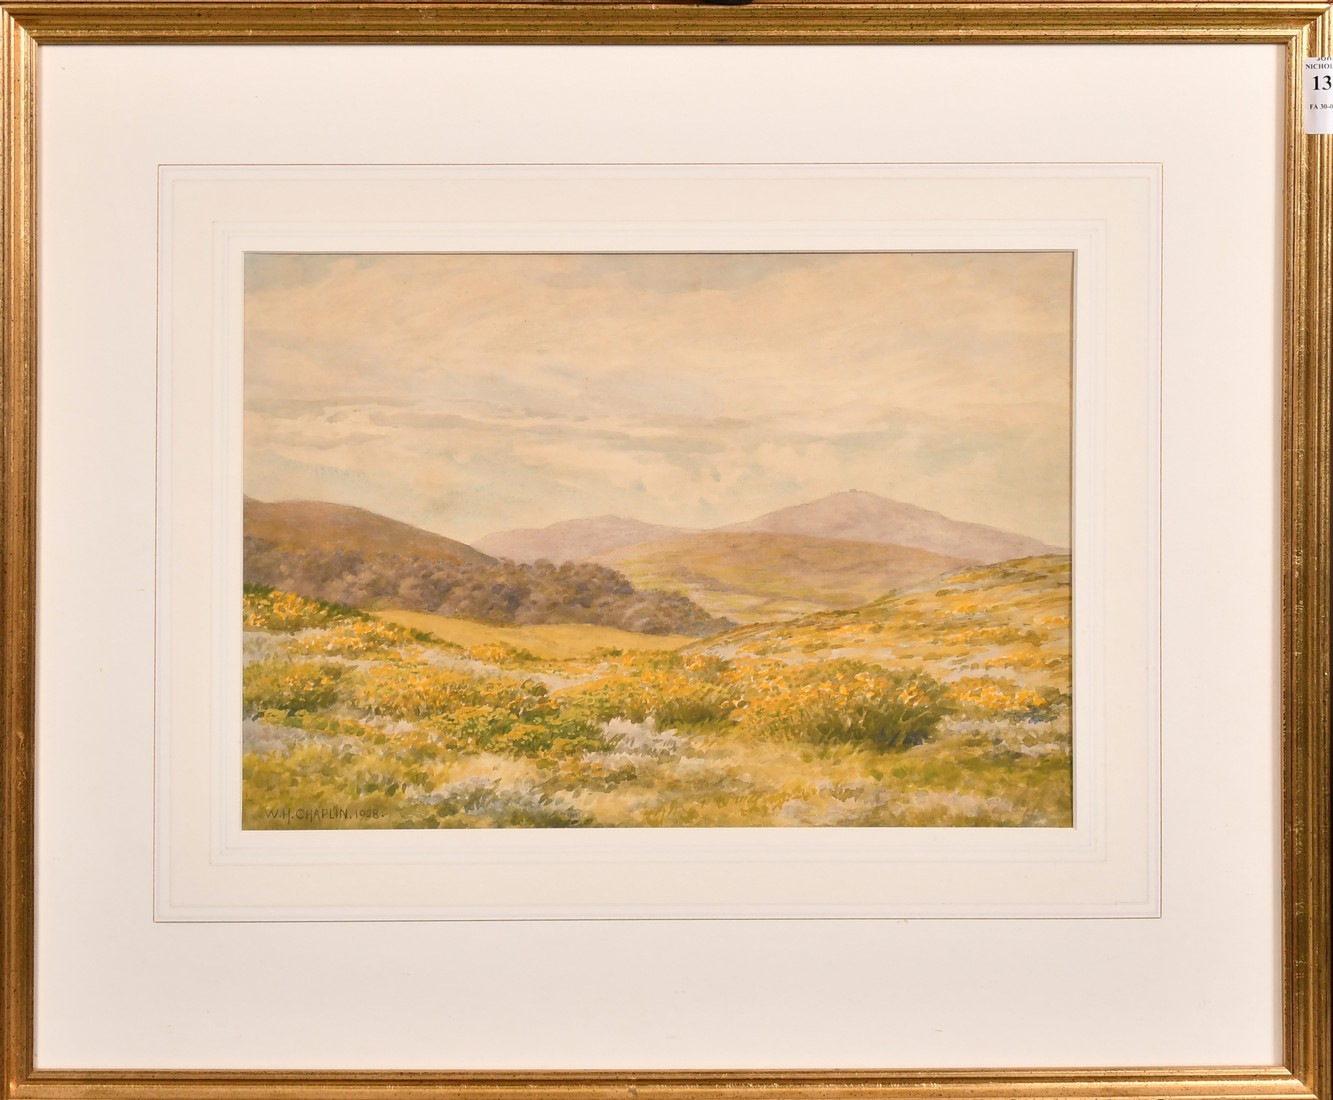 Walter H Chaplin (Exhibited late 19th Century), 'Moel Fammu, Wales', watercolour, signed, 9" x 13. - Image 2 of 4